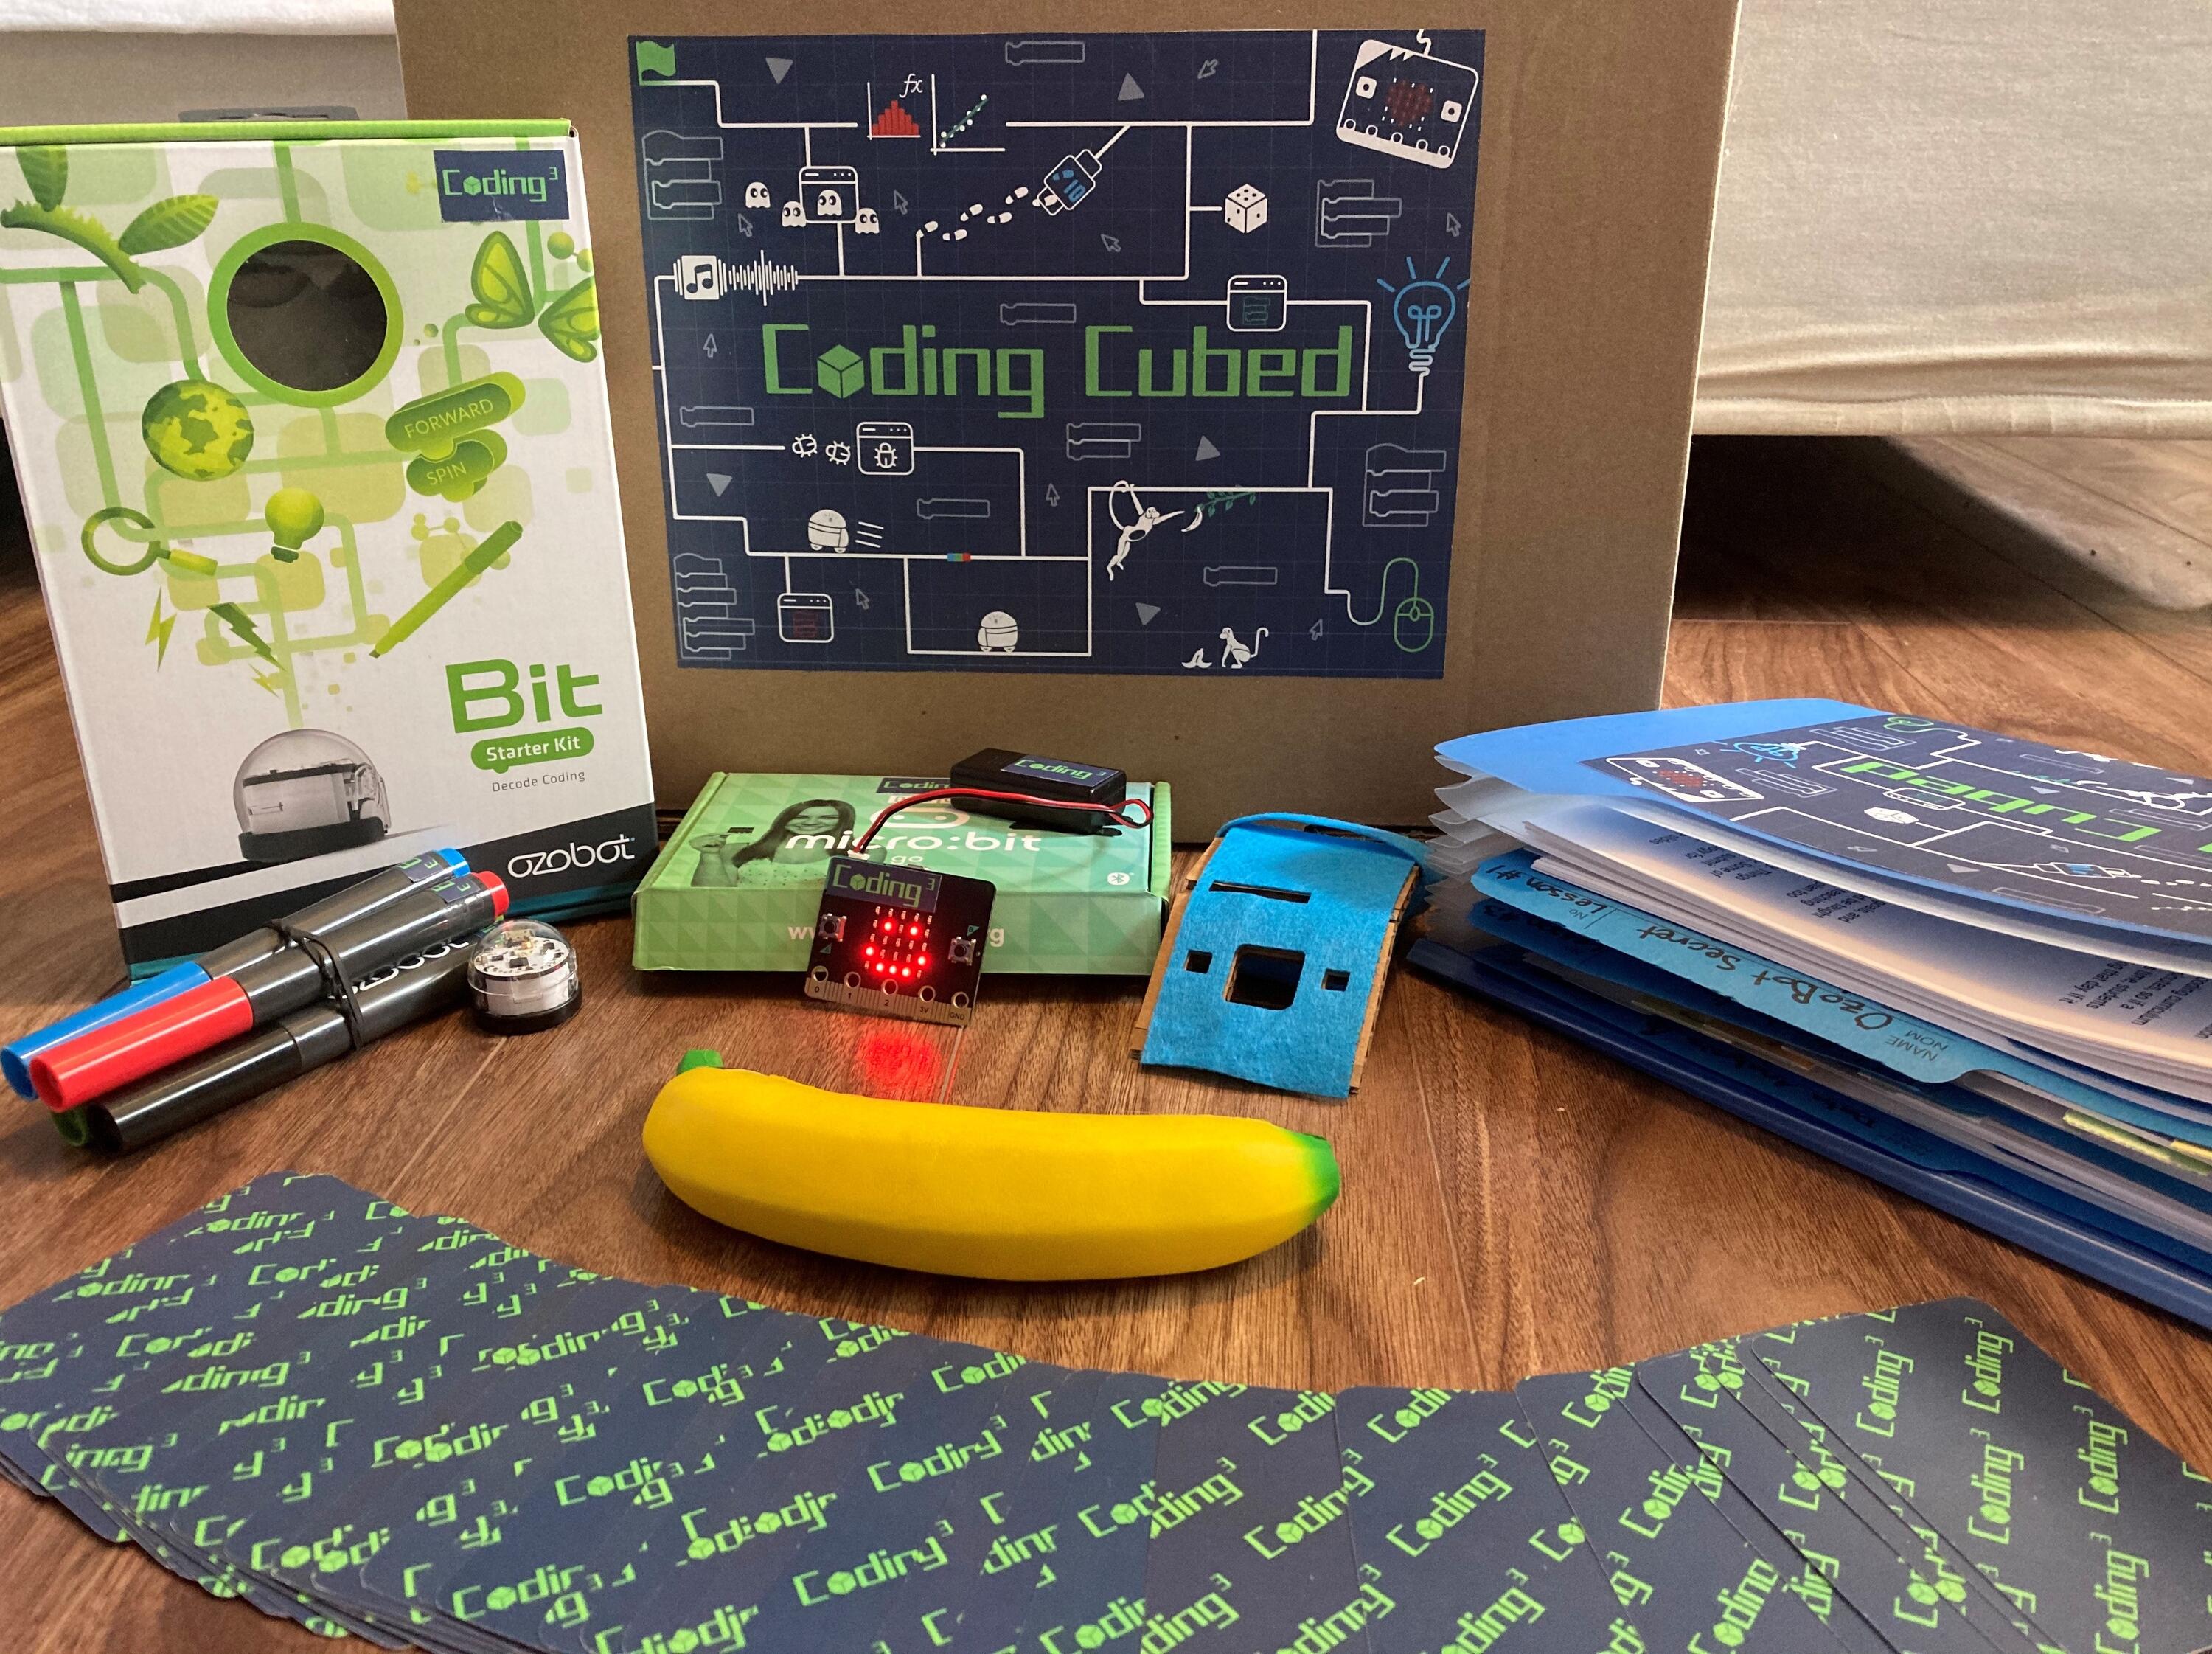 contents of the Coding cubed kit